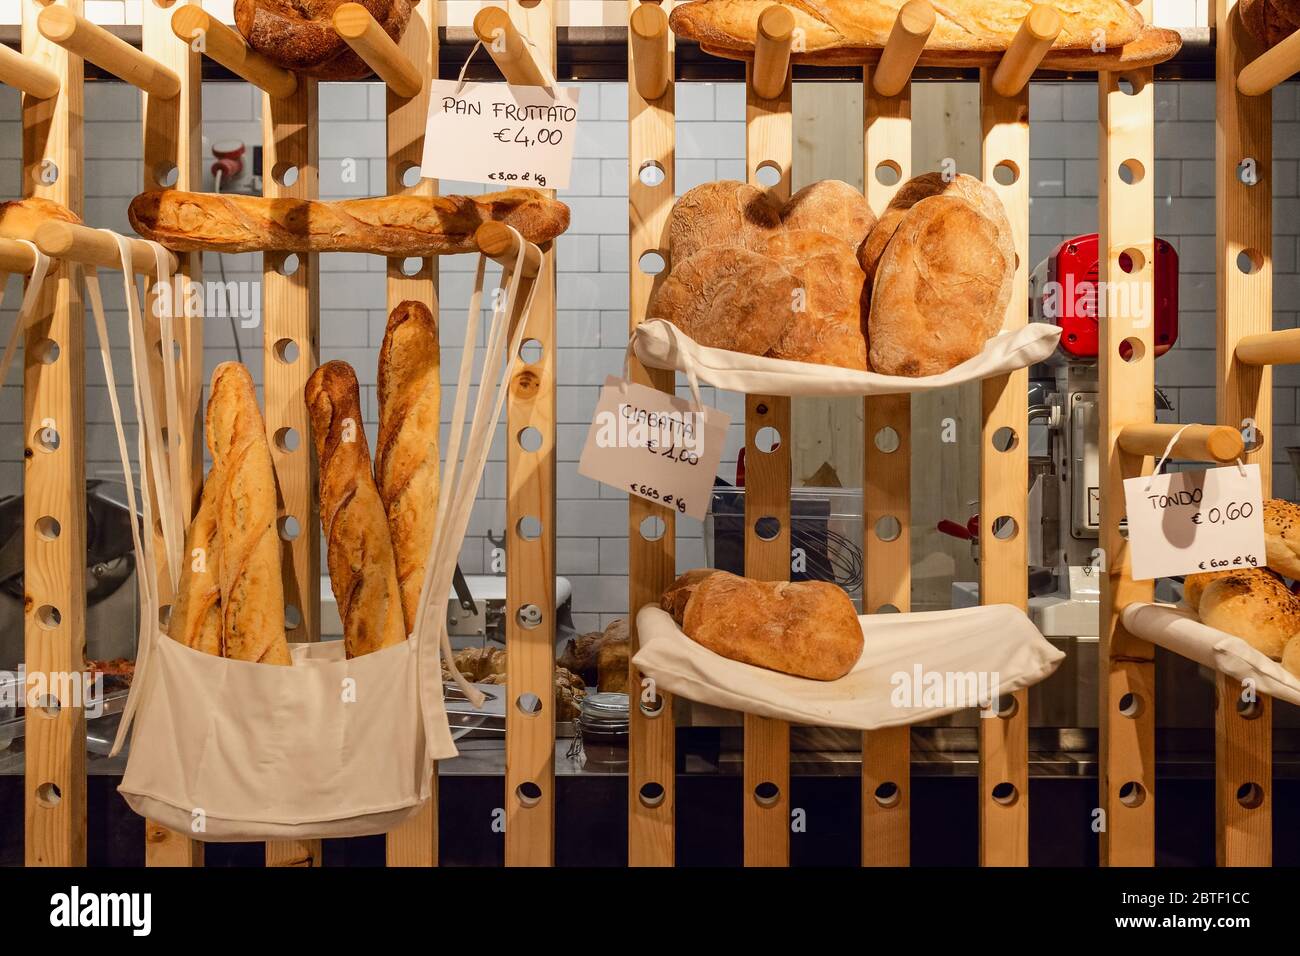 Inside view of an italian bakery shop with the kitchen in background and different bread types: pan fruttato (fruity bread), ciabatta (ciabatta bread) Stock Photo